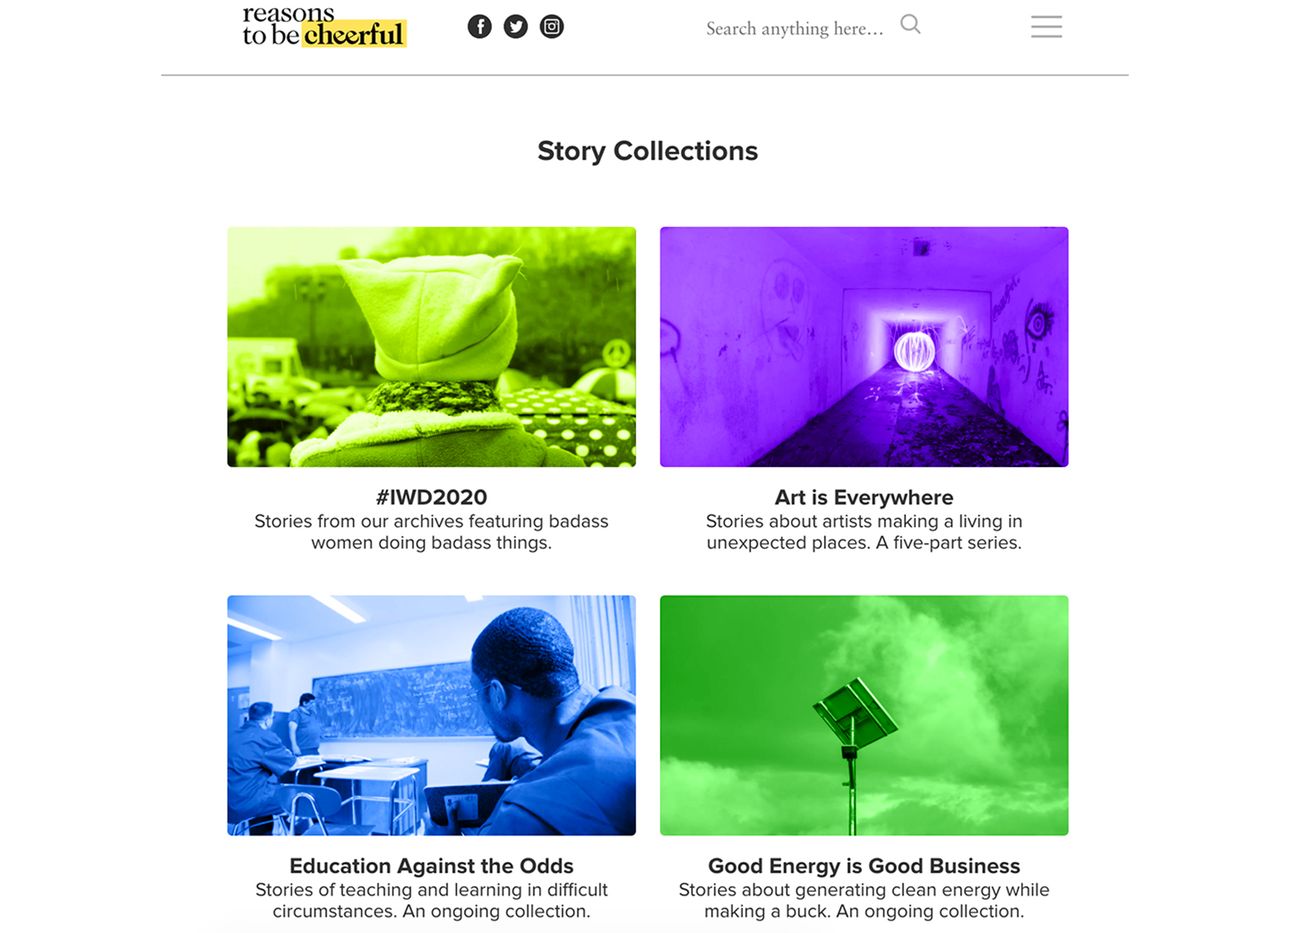 Story collections on the Reasons to be Cheerful website.